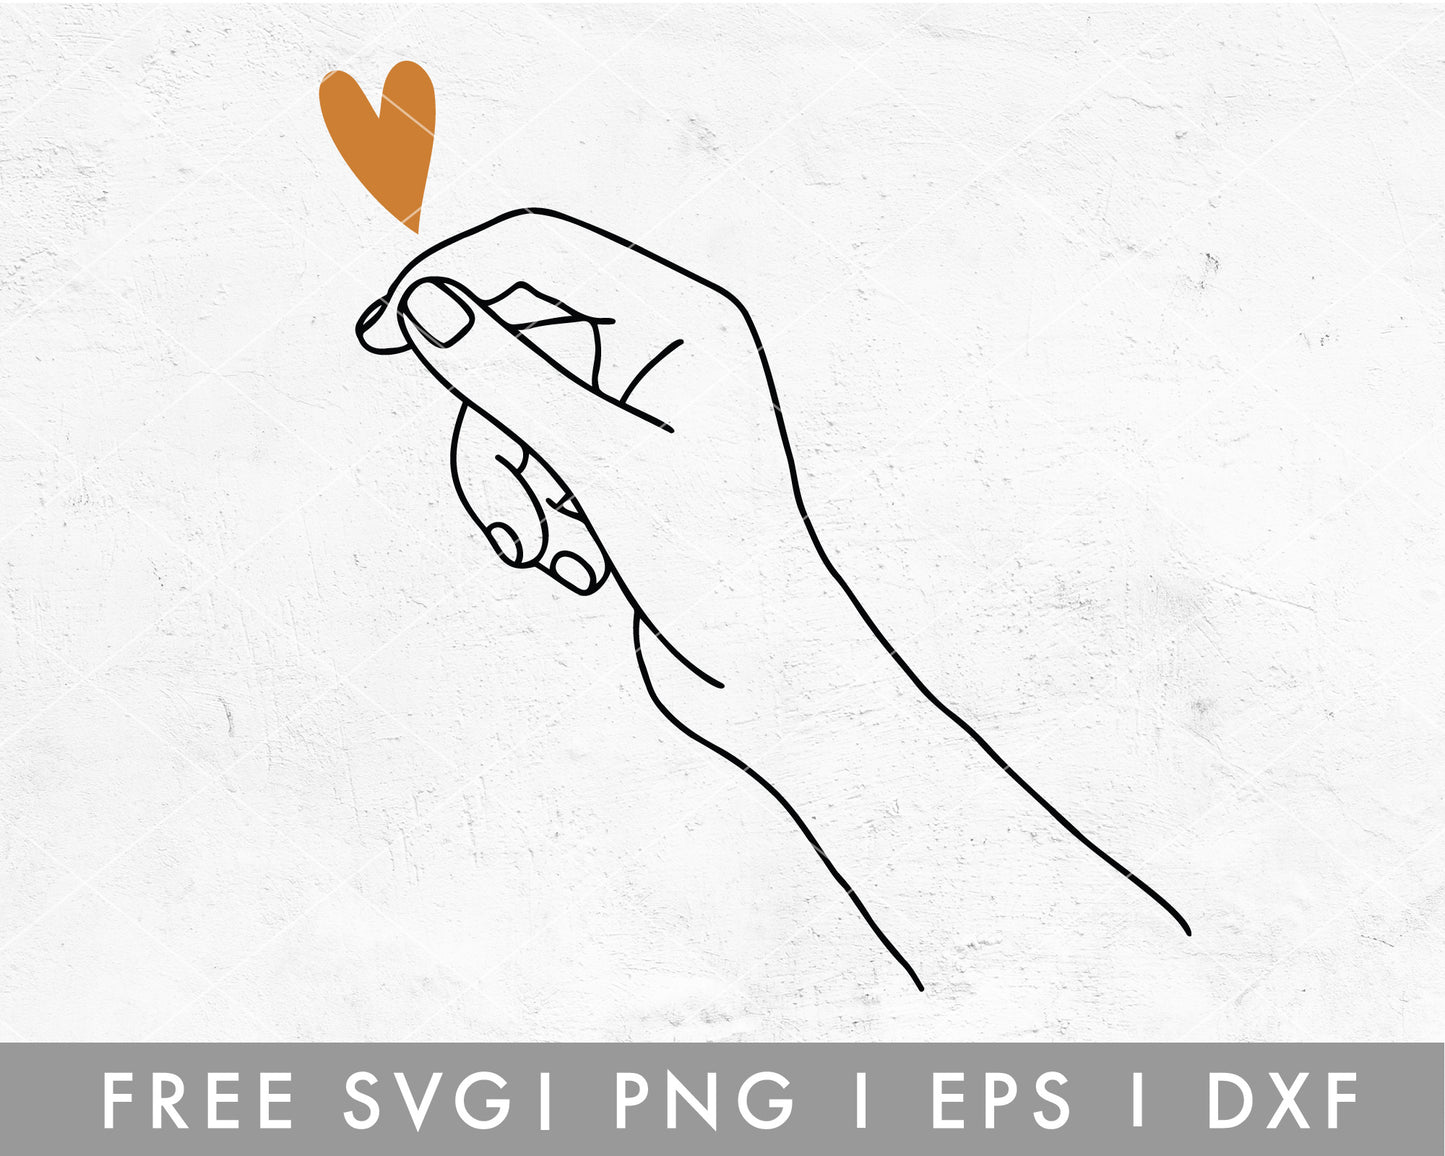 FREE Heart Holding Hand SVG